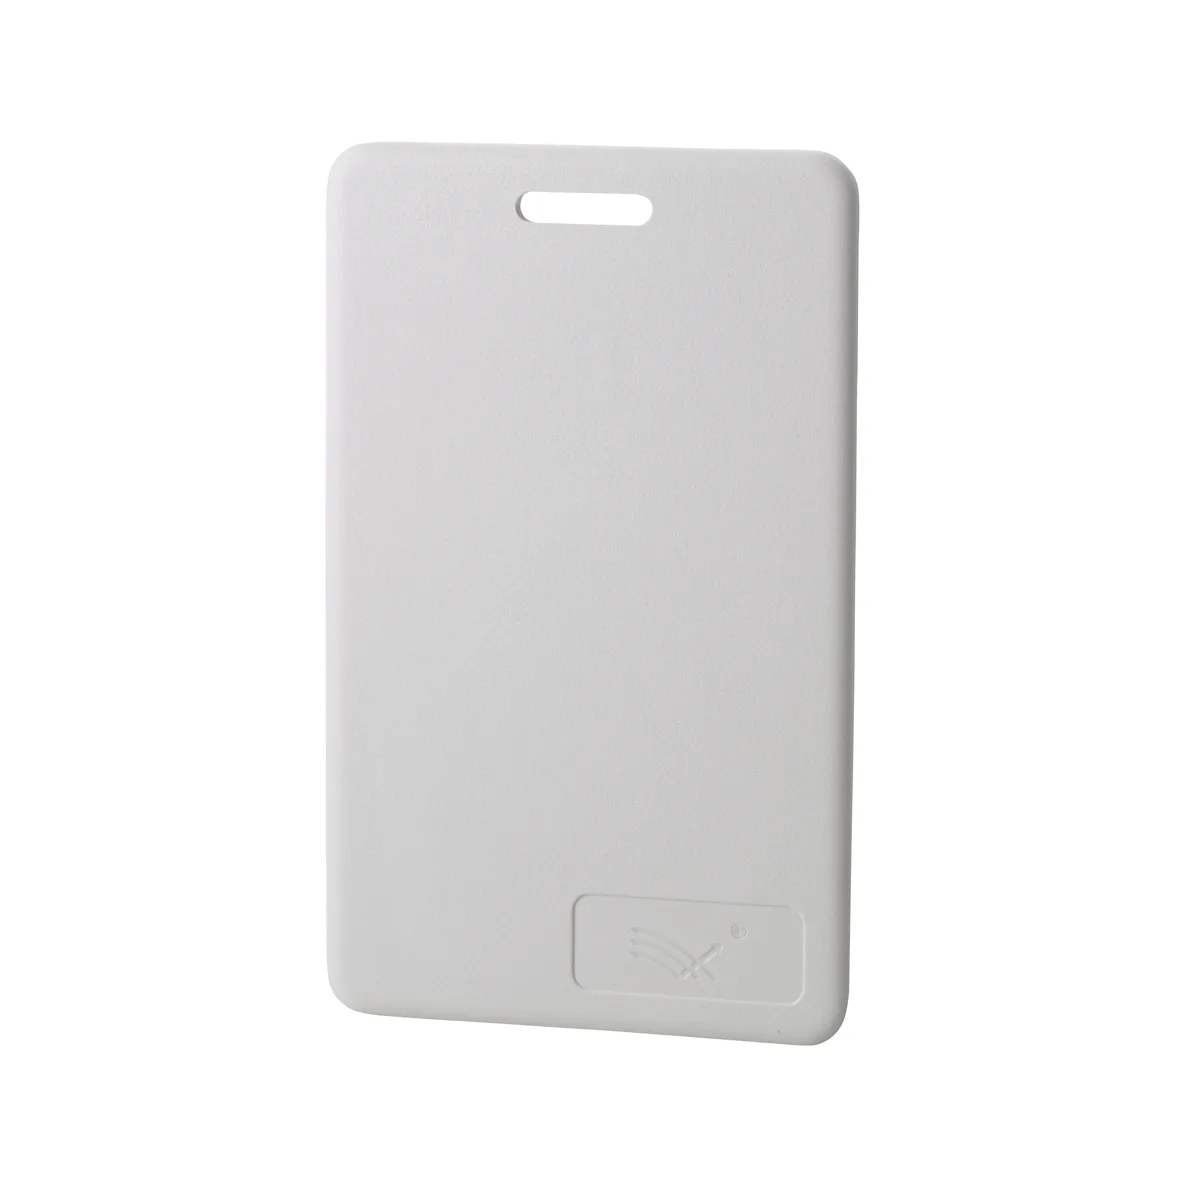 PSC-1-H Standard Light Proximity Card, Pack of 100